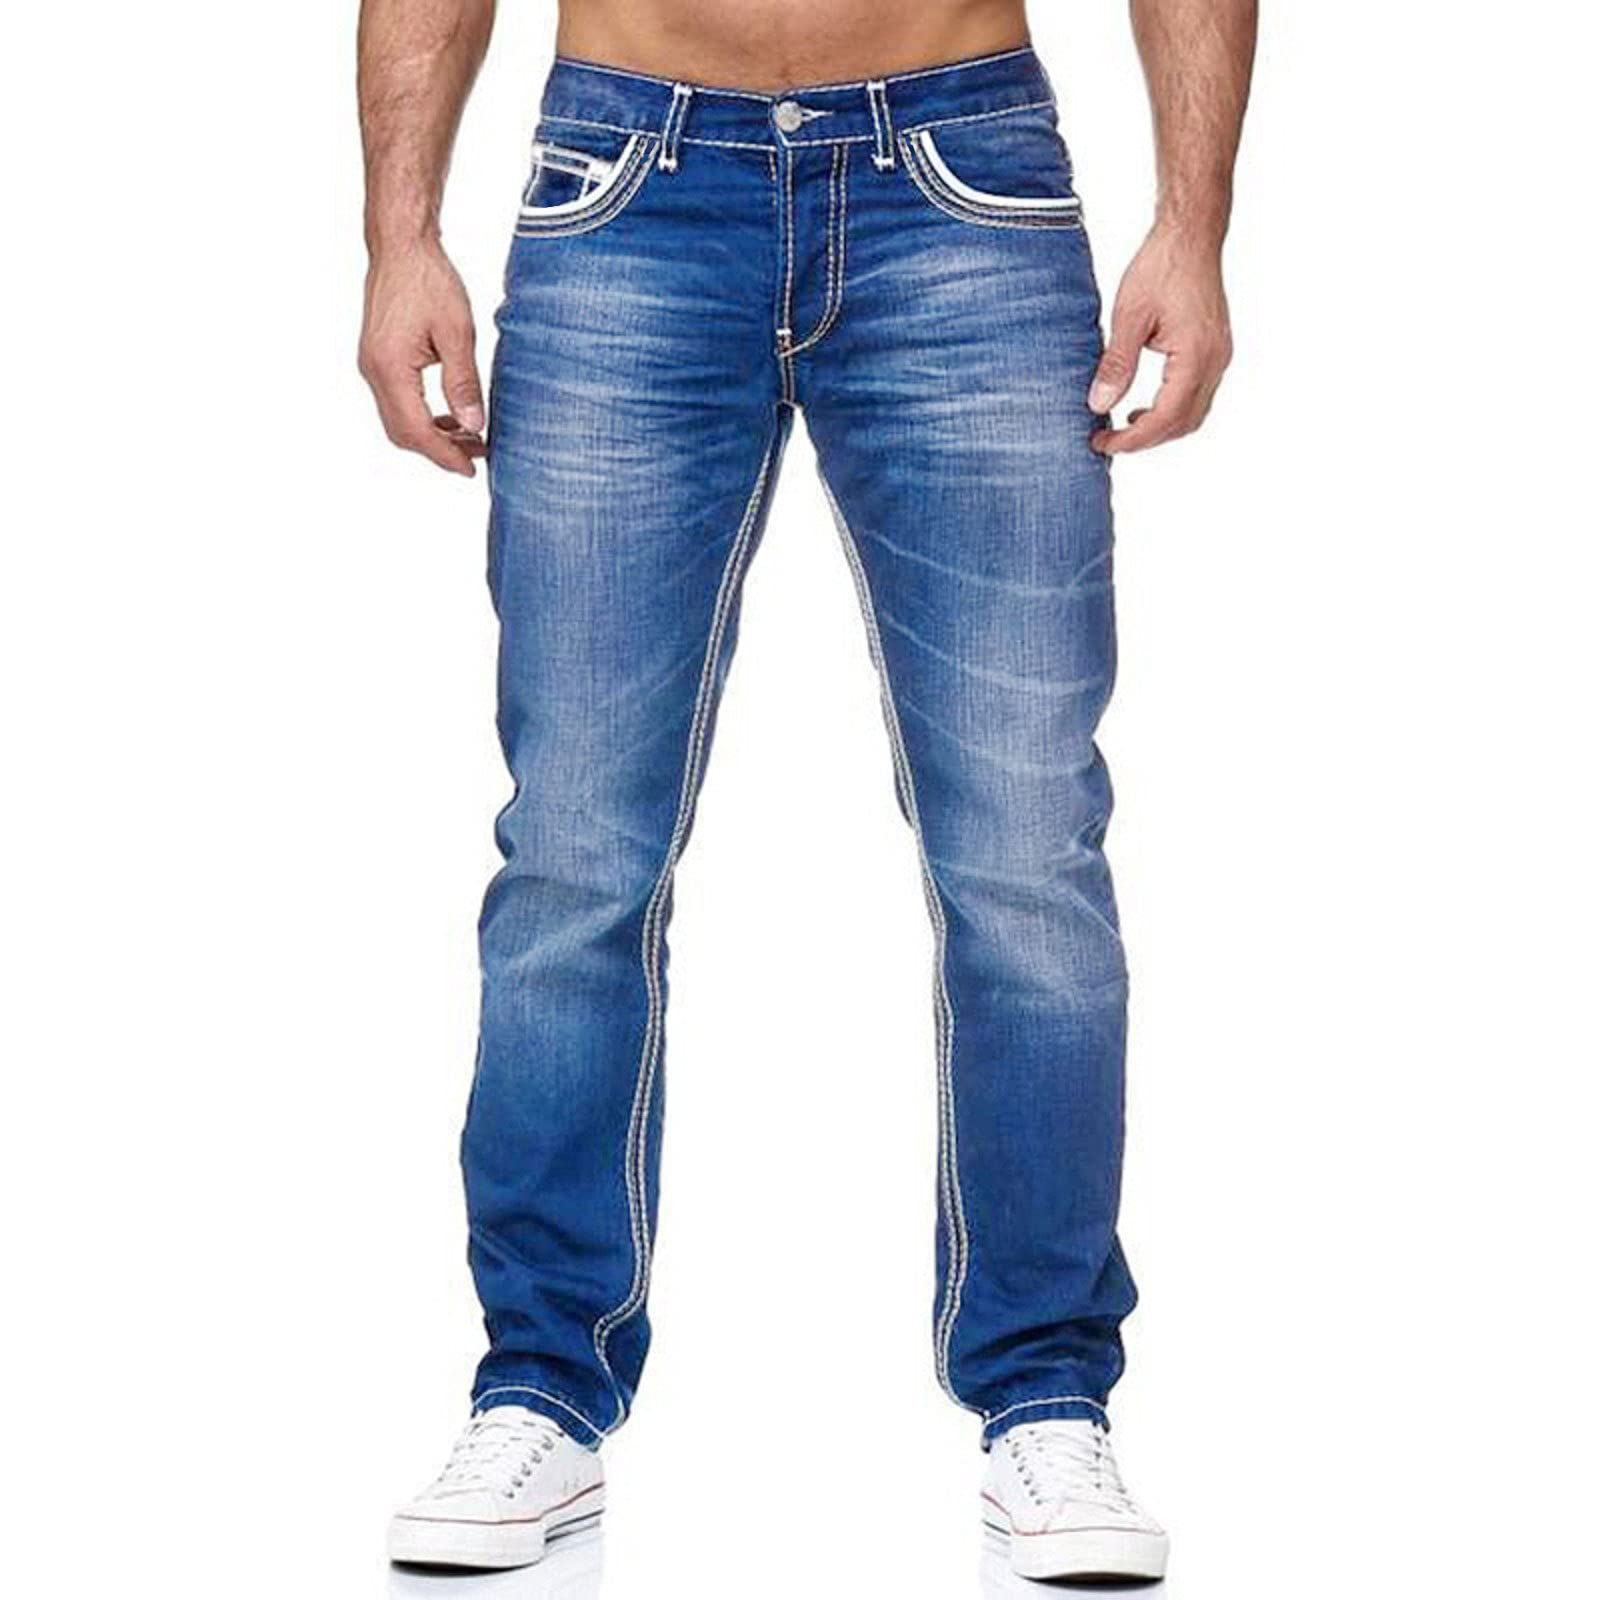   European and American High Quality Wish New Men's Slim Double ine Jeans Amazon SATINE Three Color Jeans New